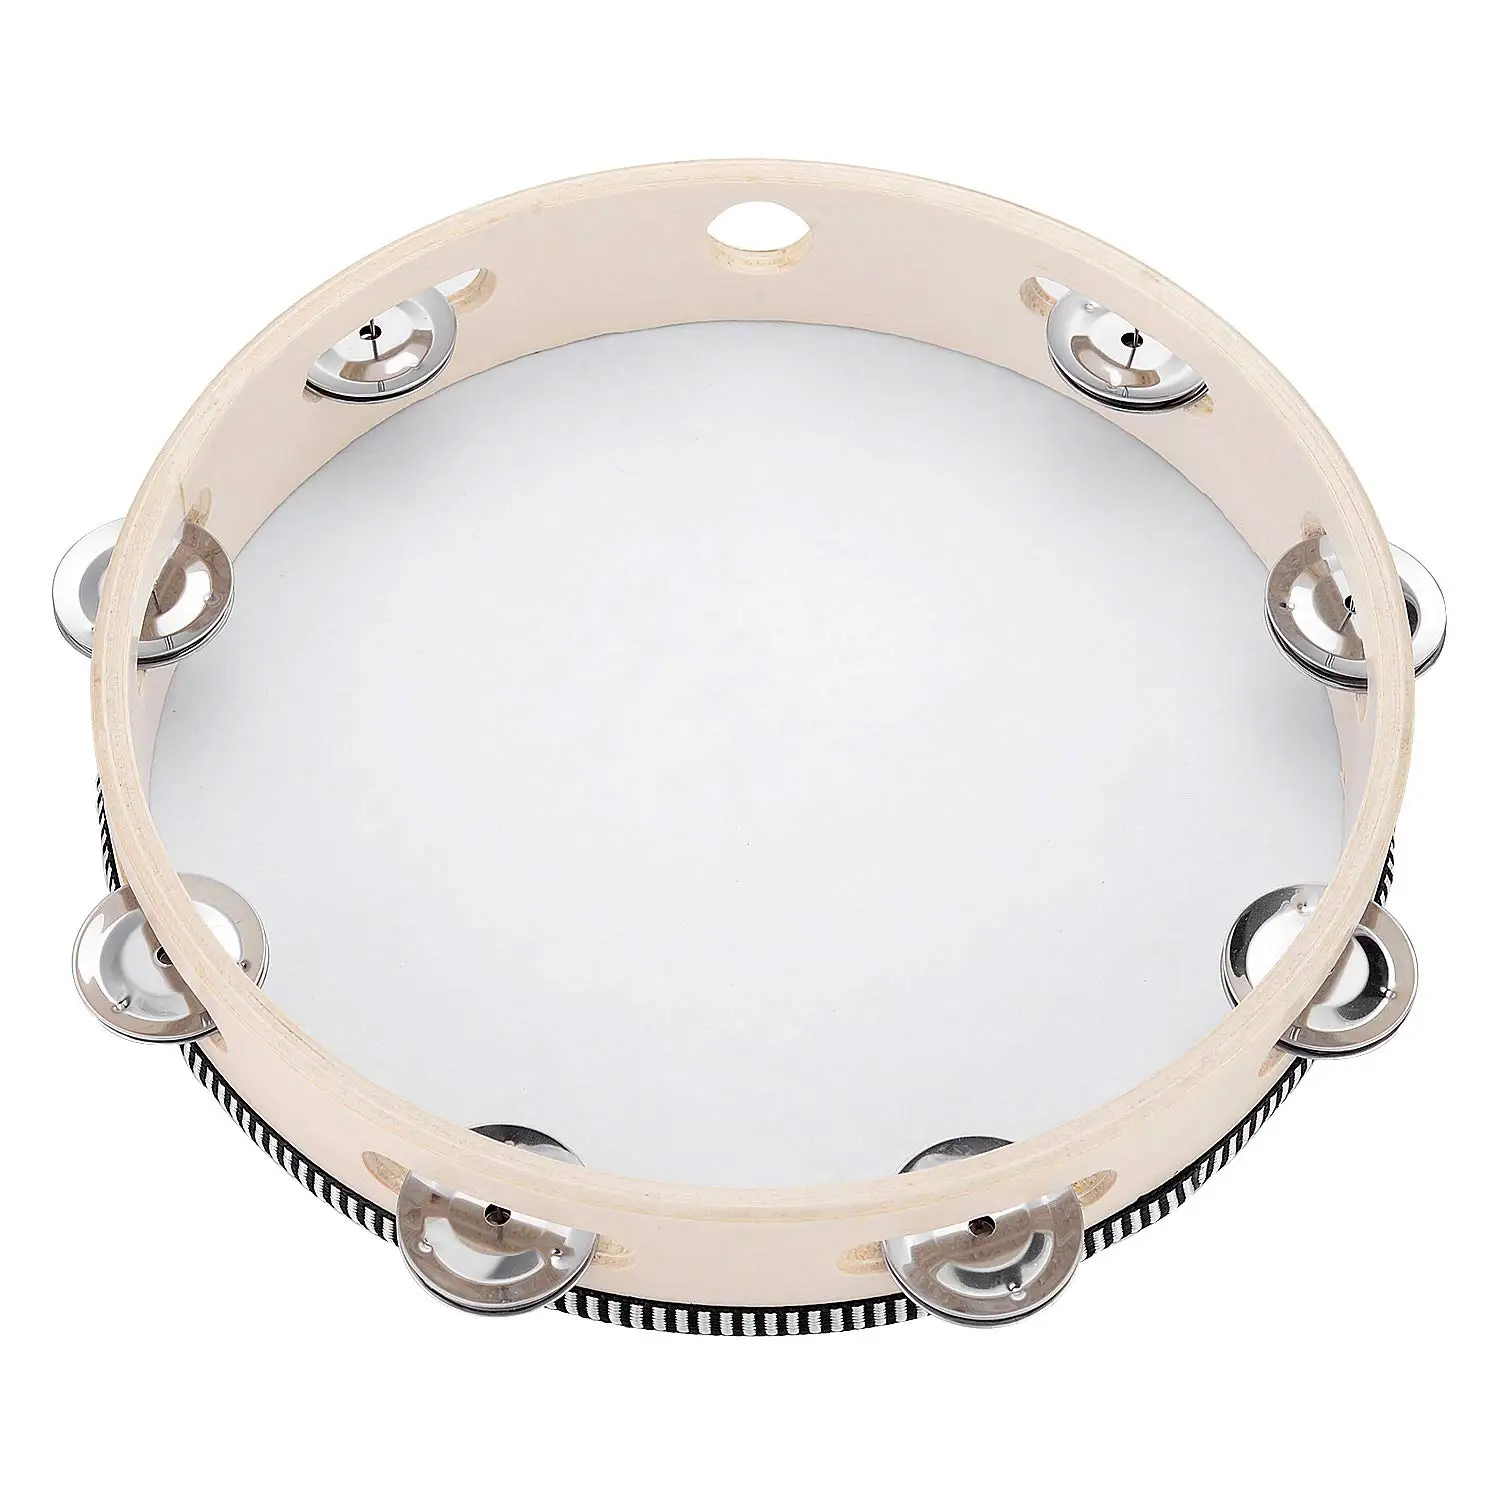 6 IN SOHAPY Hand Held Tambourine Drum 6 inch Bell Birch Metal Jingles Percussion Gift Musical Educational Drum Instrument 